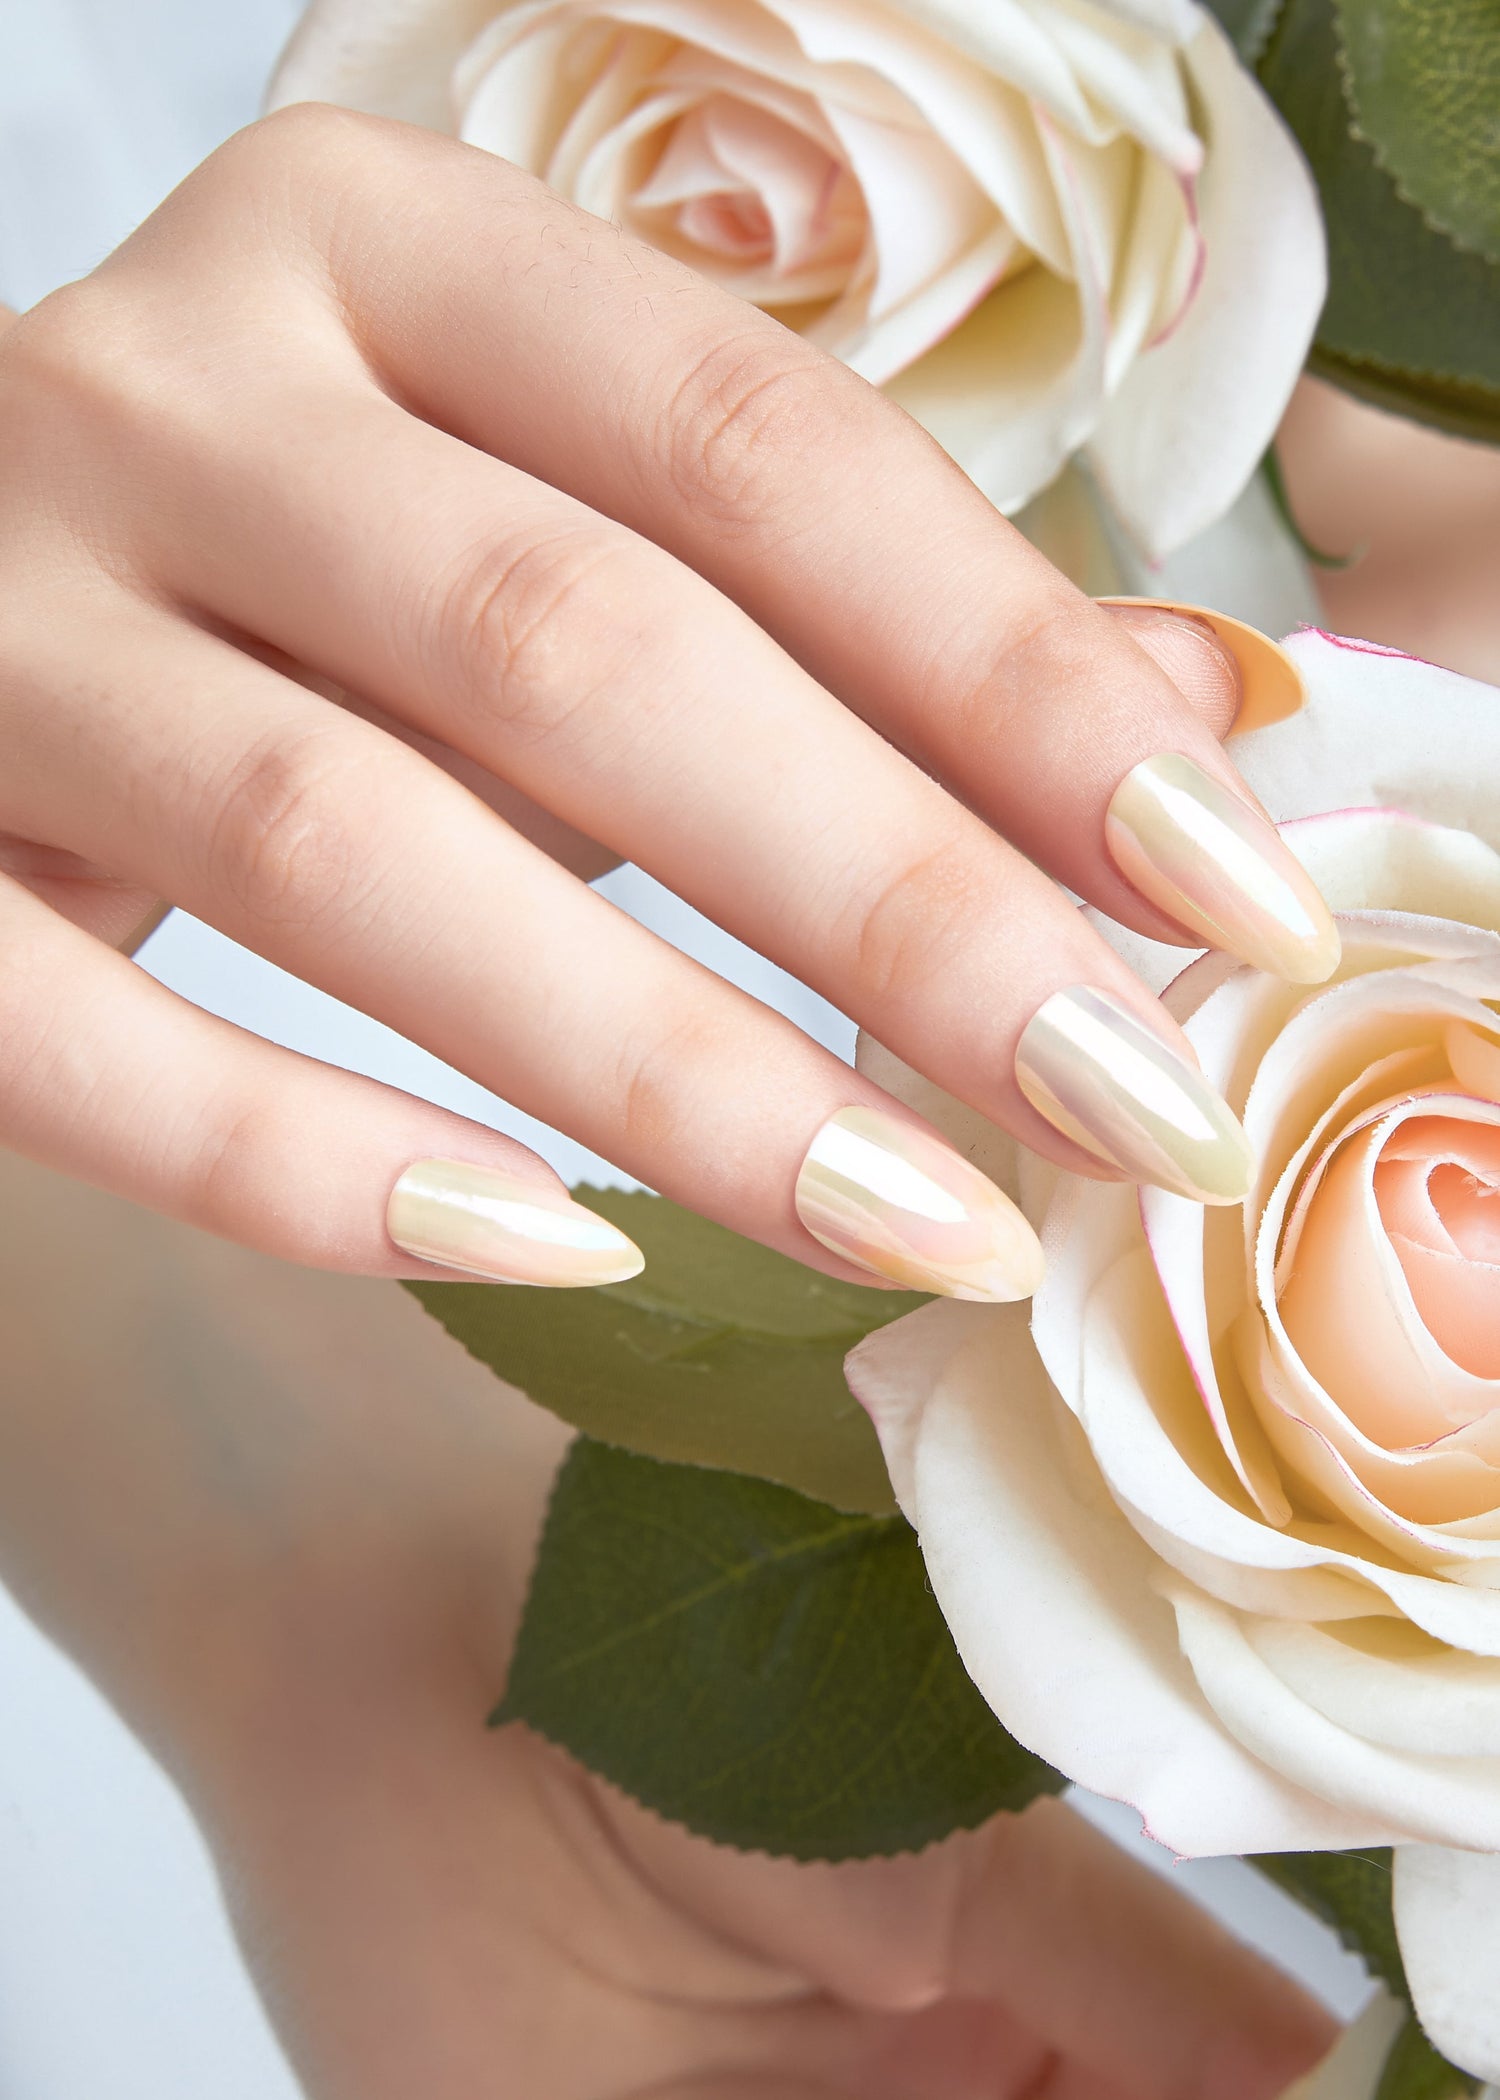 Satin Slip Nails: The Chic and Elegant Summer Trend